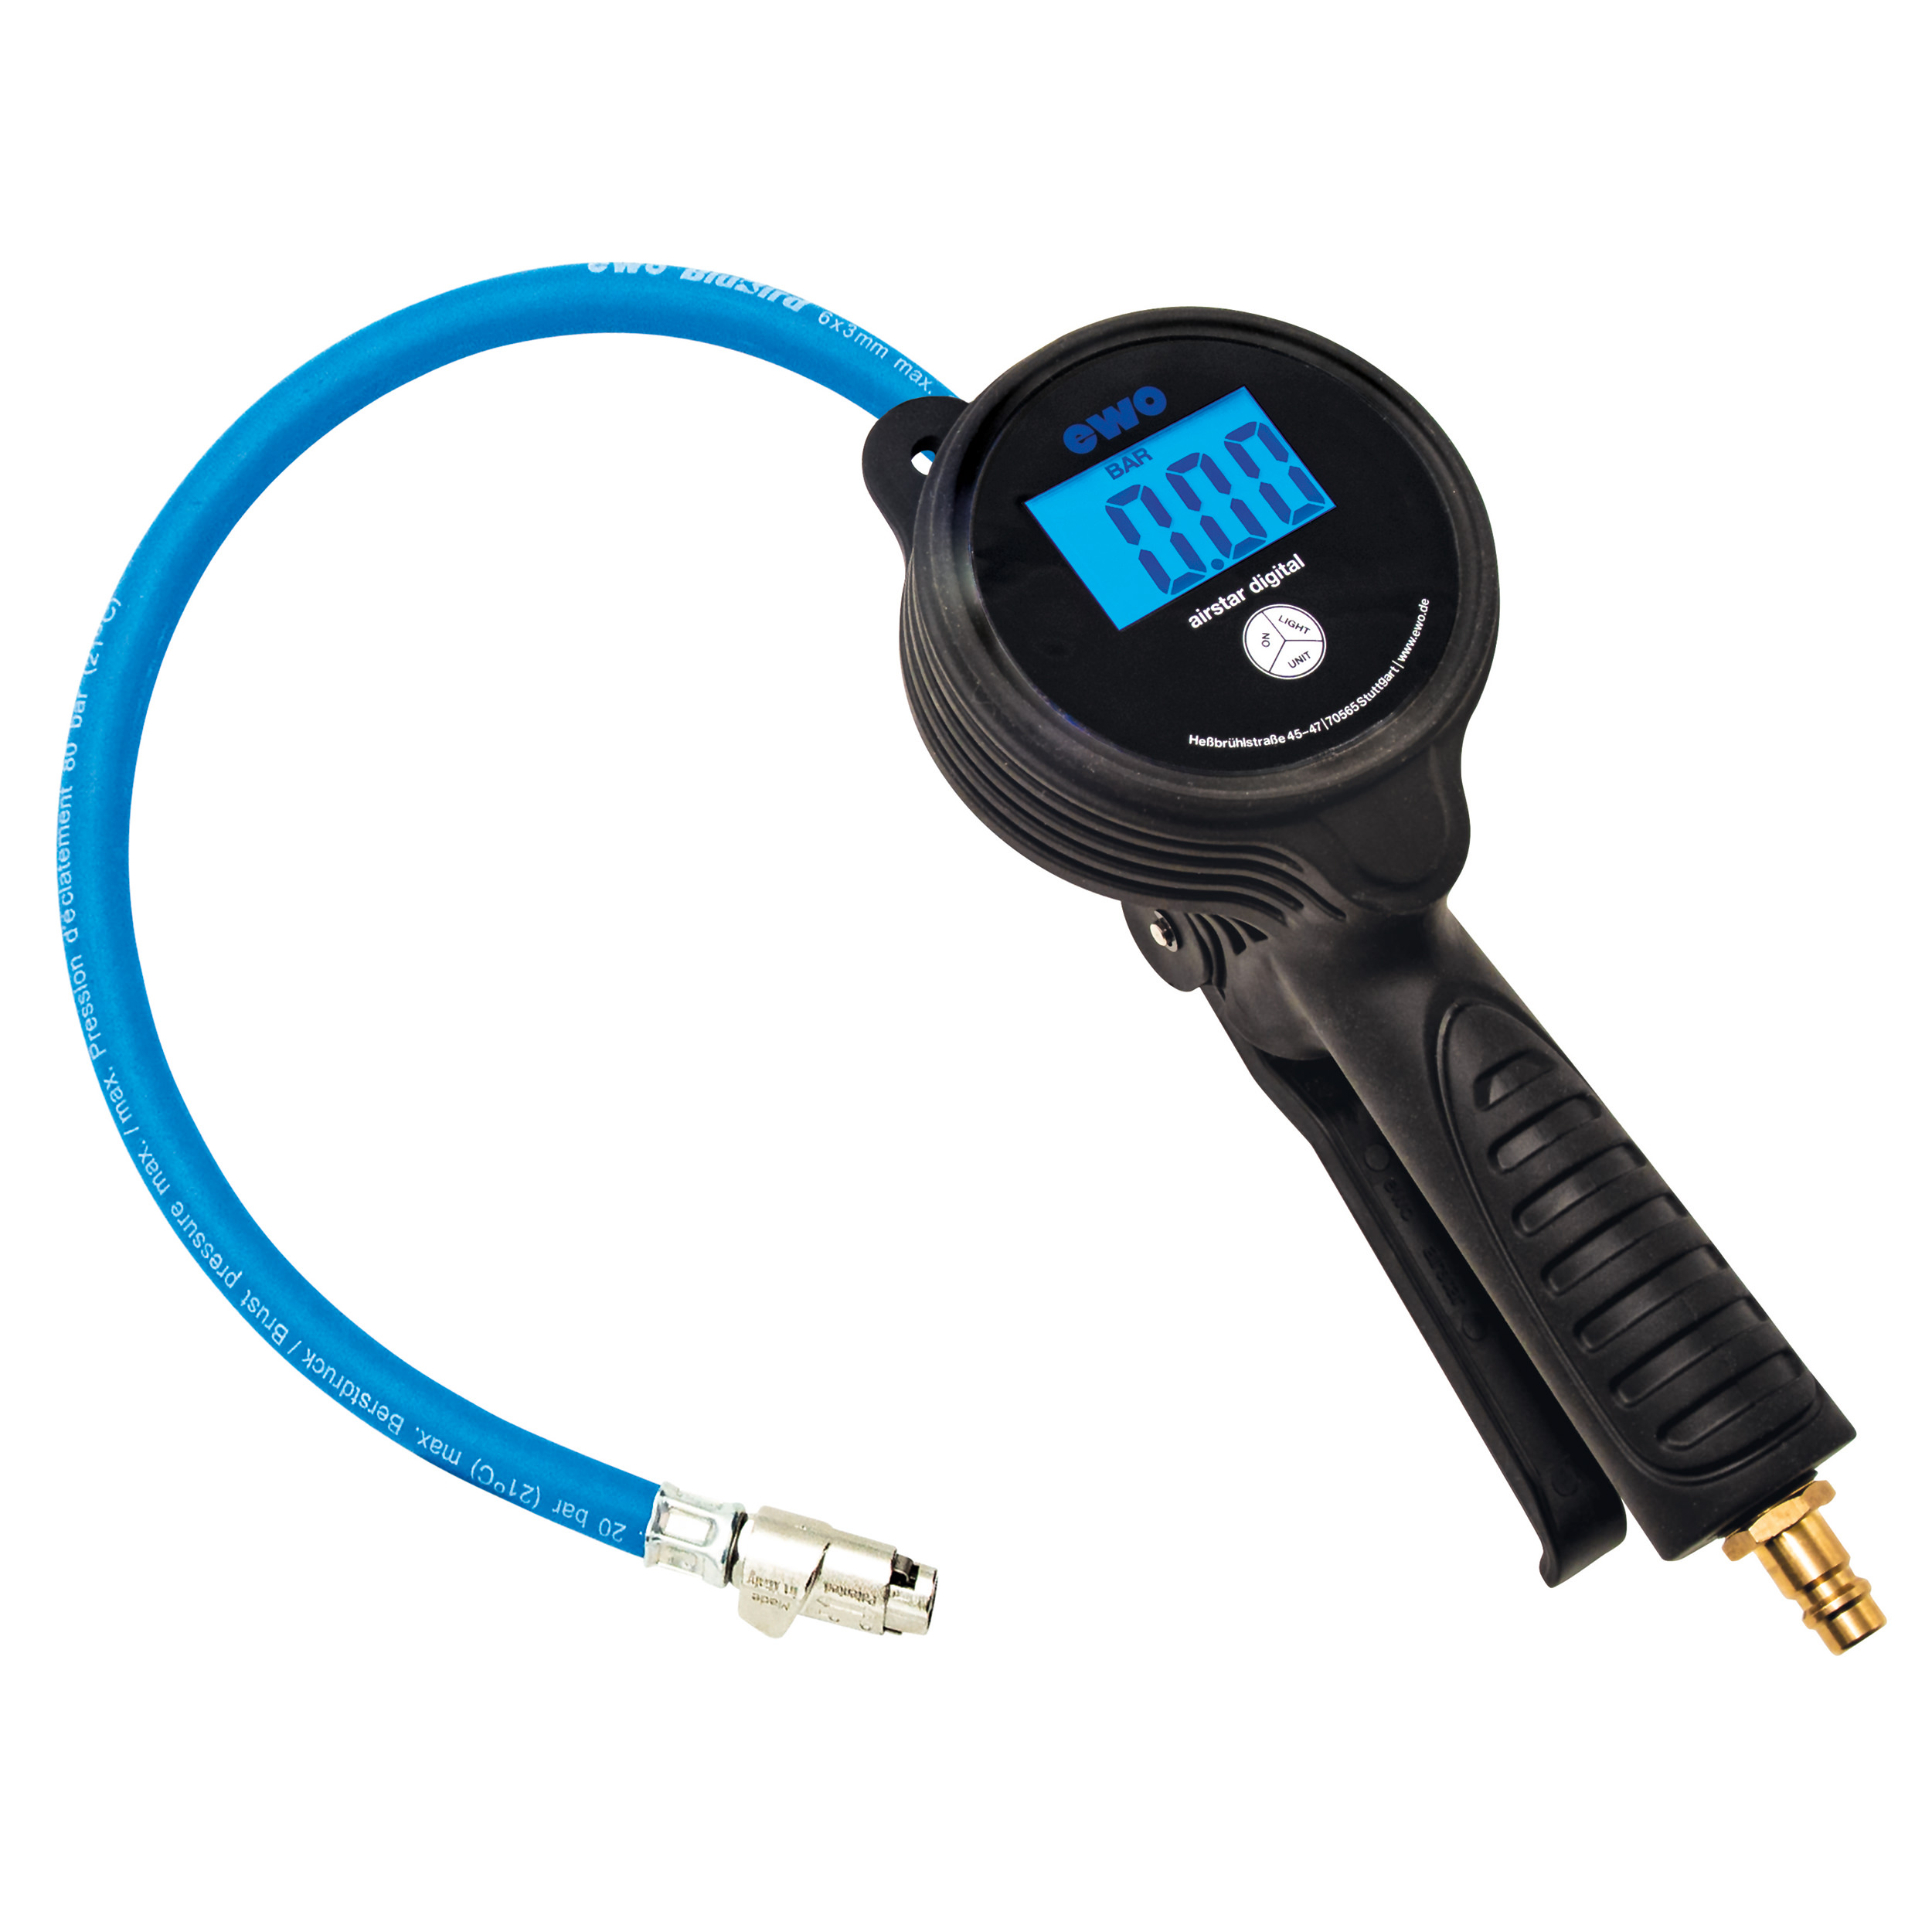 Tire inflator airstar digital, quick connector, hose: 0.5 m, gauge Ø80 mm, meas. range 12 bar, without conformity assess.